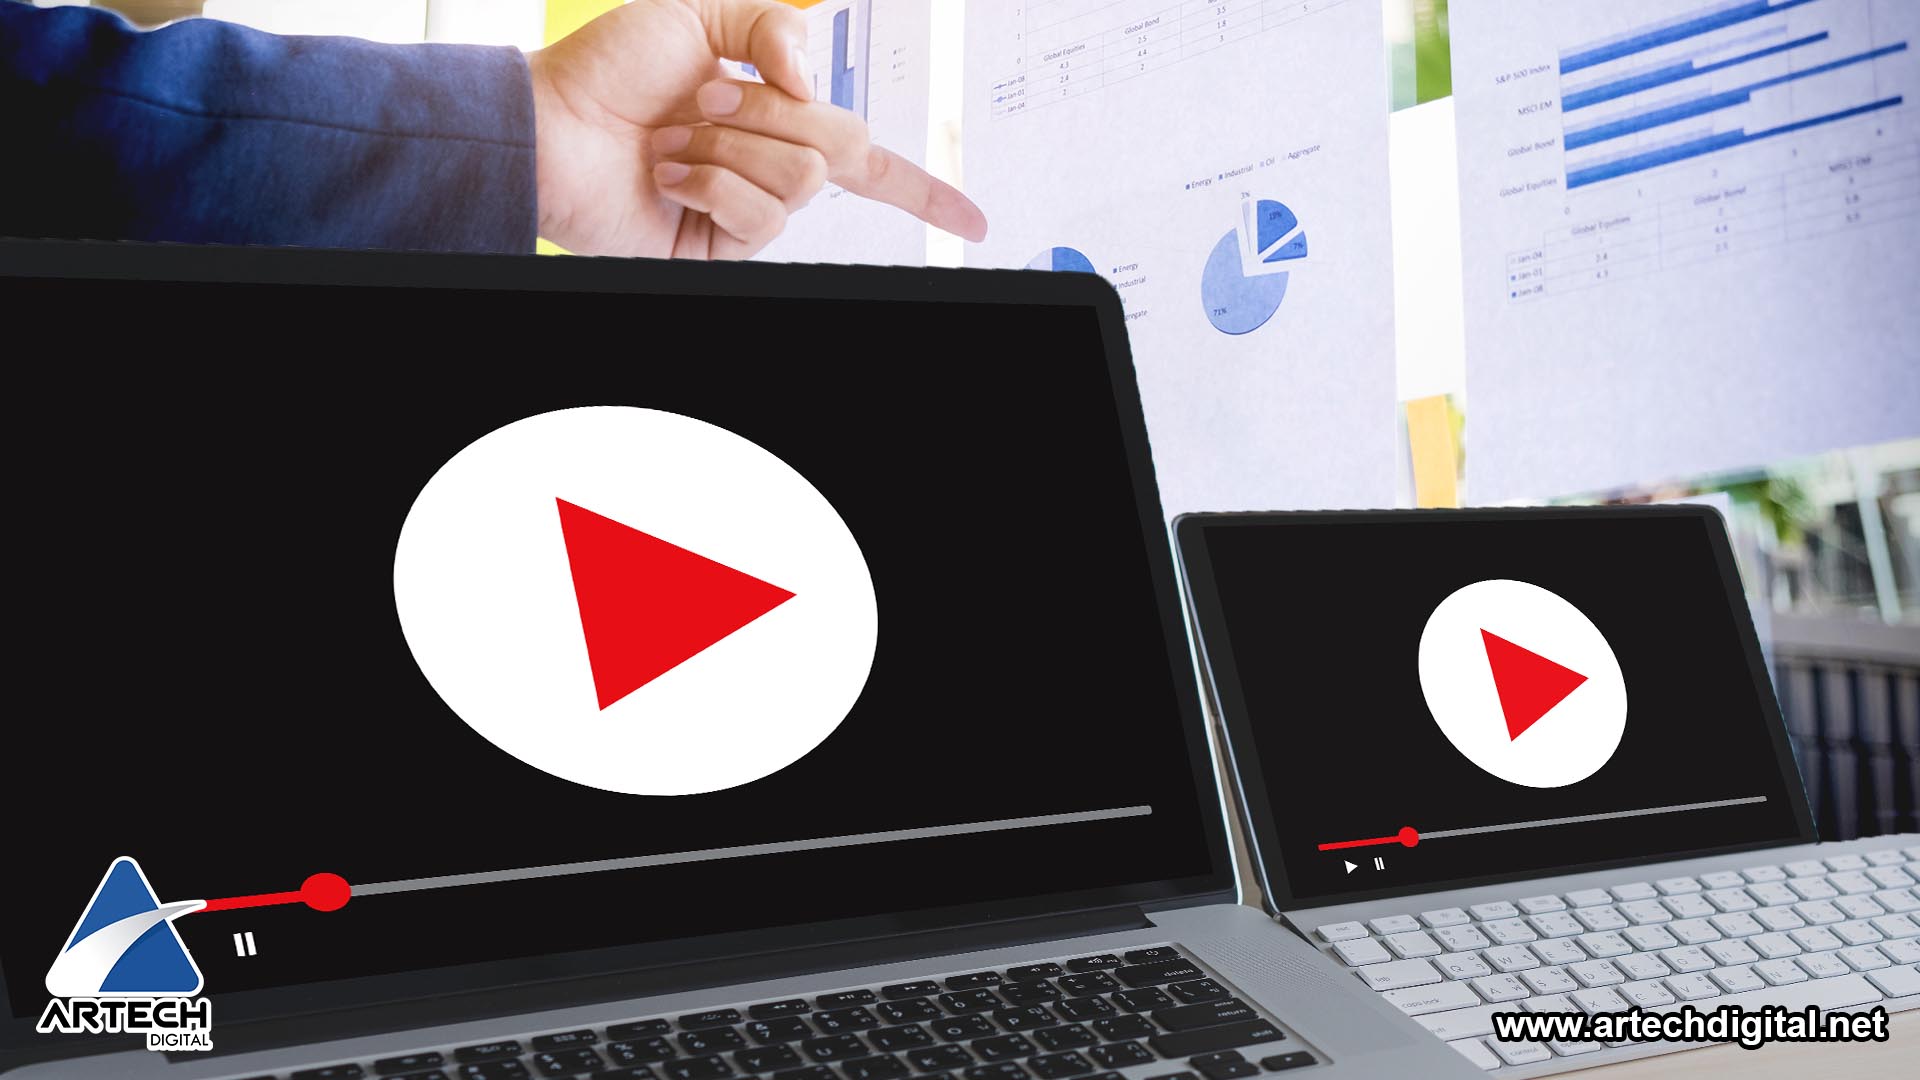 Video and new trends in Marketing - Artech Digital 